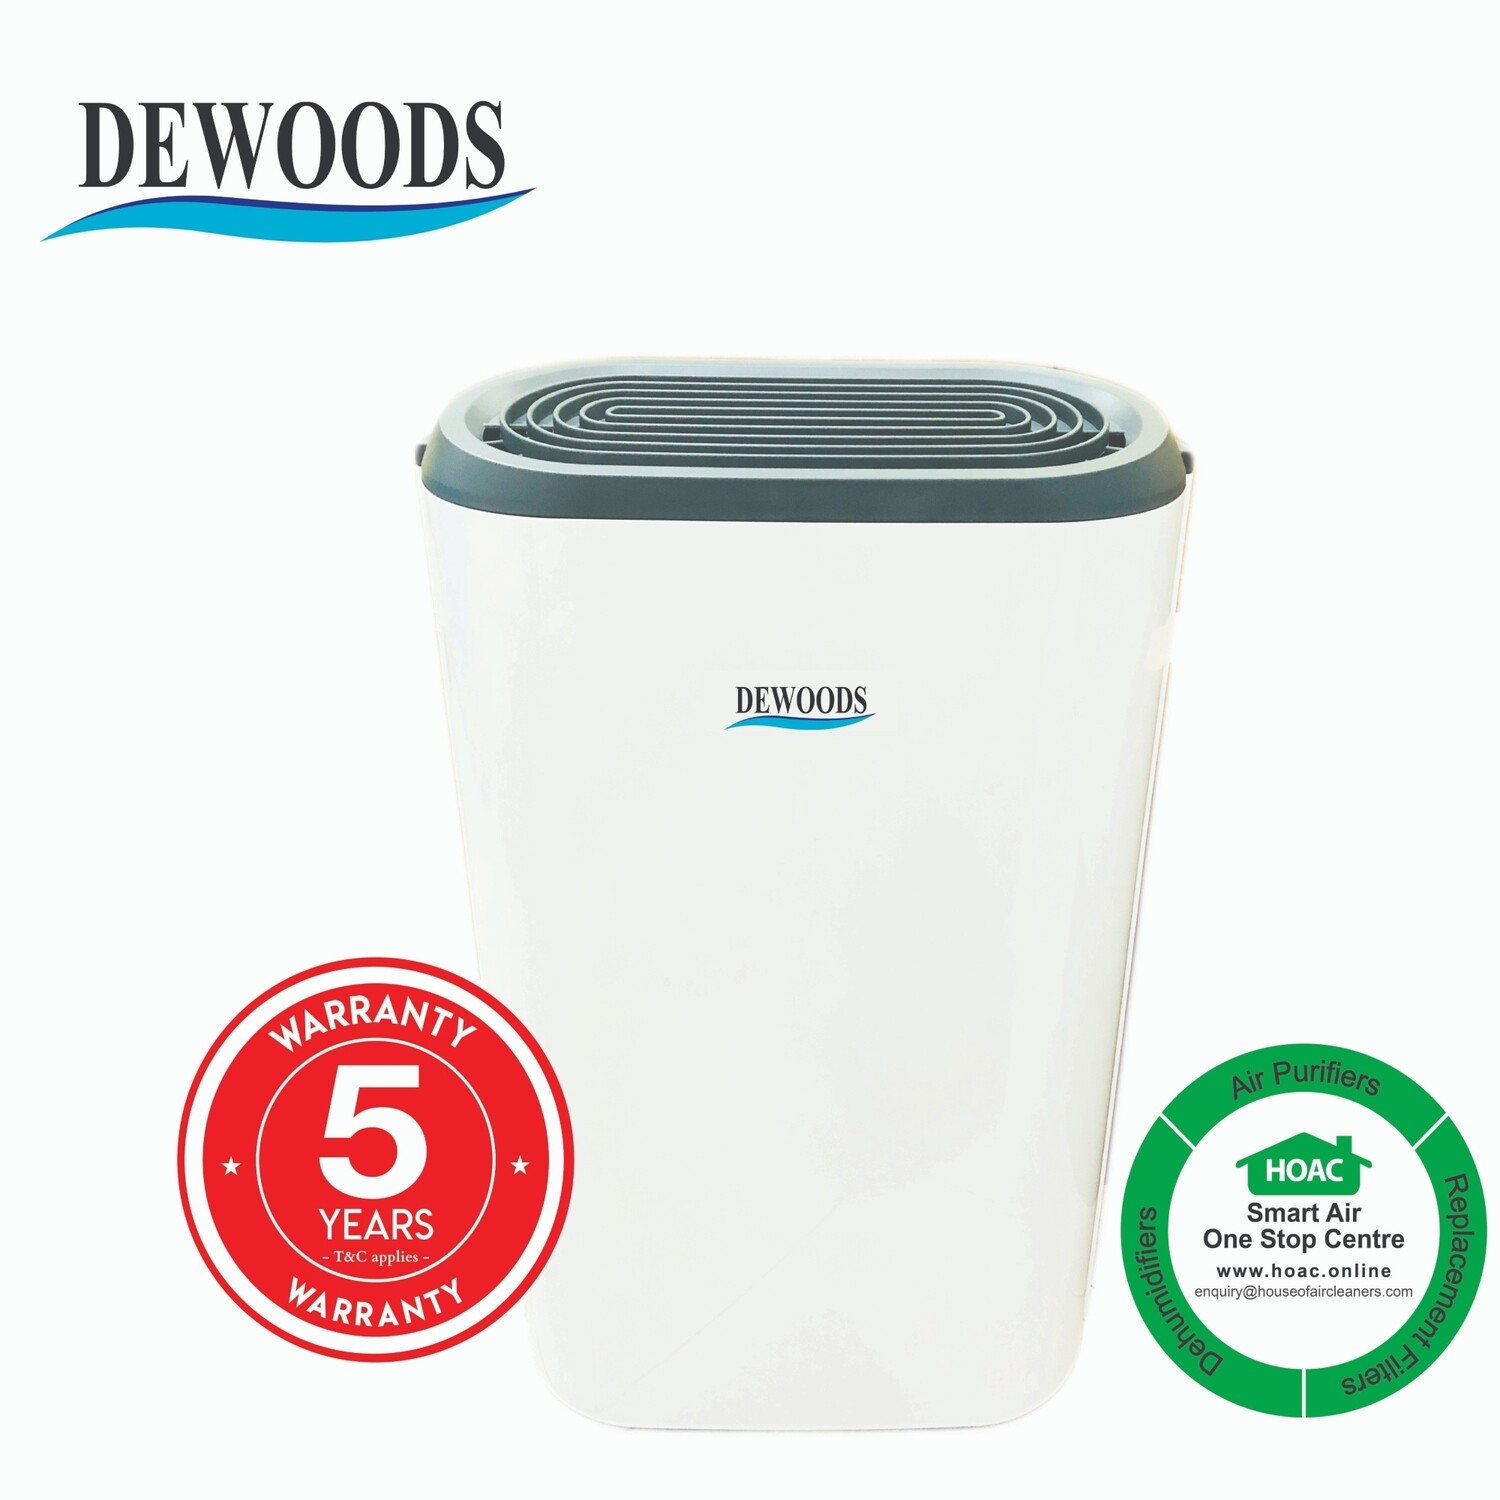 DEWOODS Dehumidifier MDH-12A (12 Litres) With 5 YEARS WARRANTY